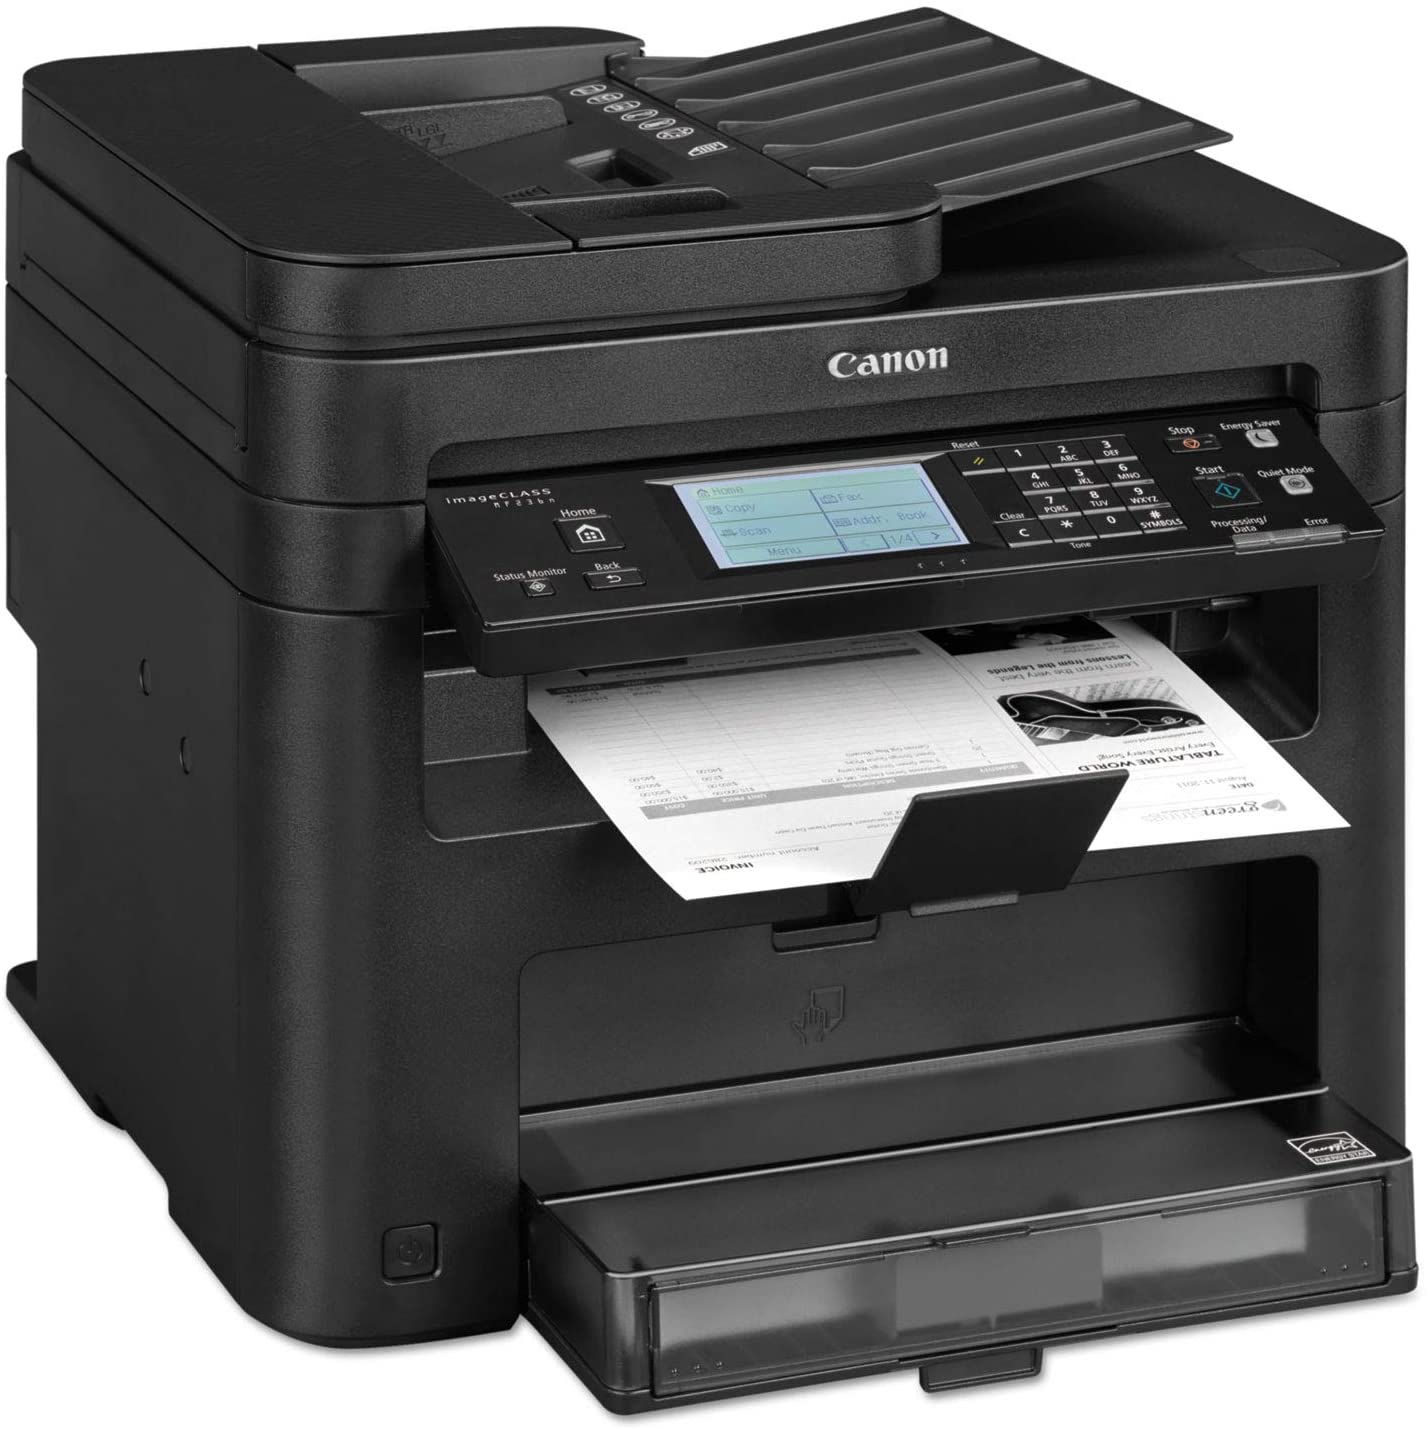 Canon ImageCLASS MF236n All in One, Mobile Ready Printer, Black,